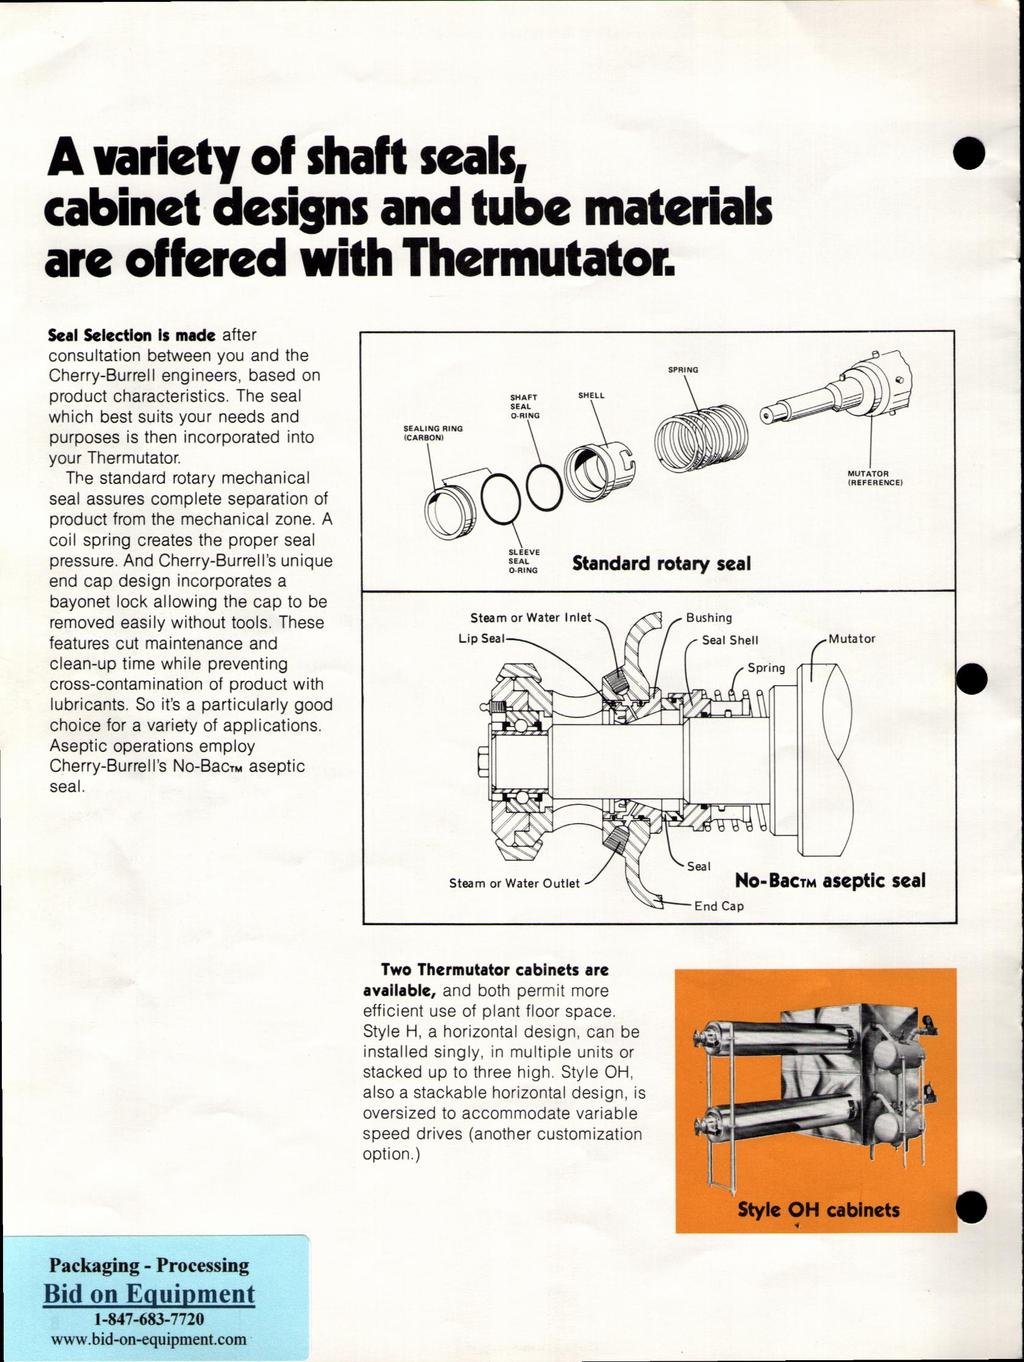 A variety of shaft seals, cabinet designs and tube materials are offered with Thermutator.